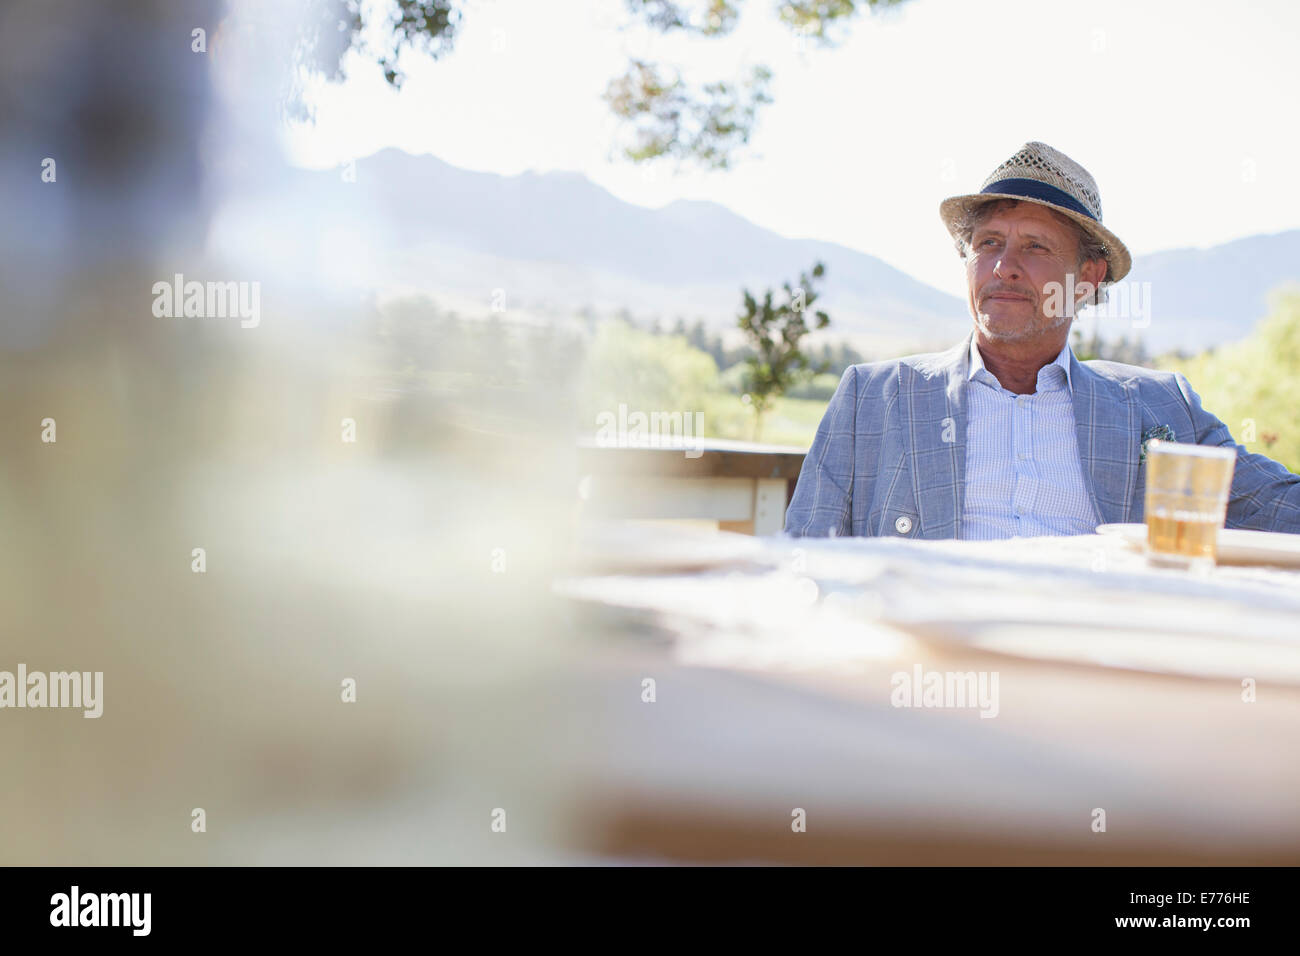 Older man sitting at outdoor dinning table Stock Photo